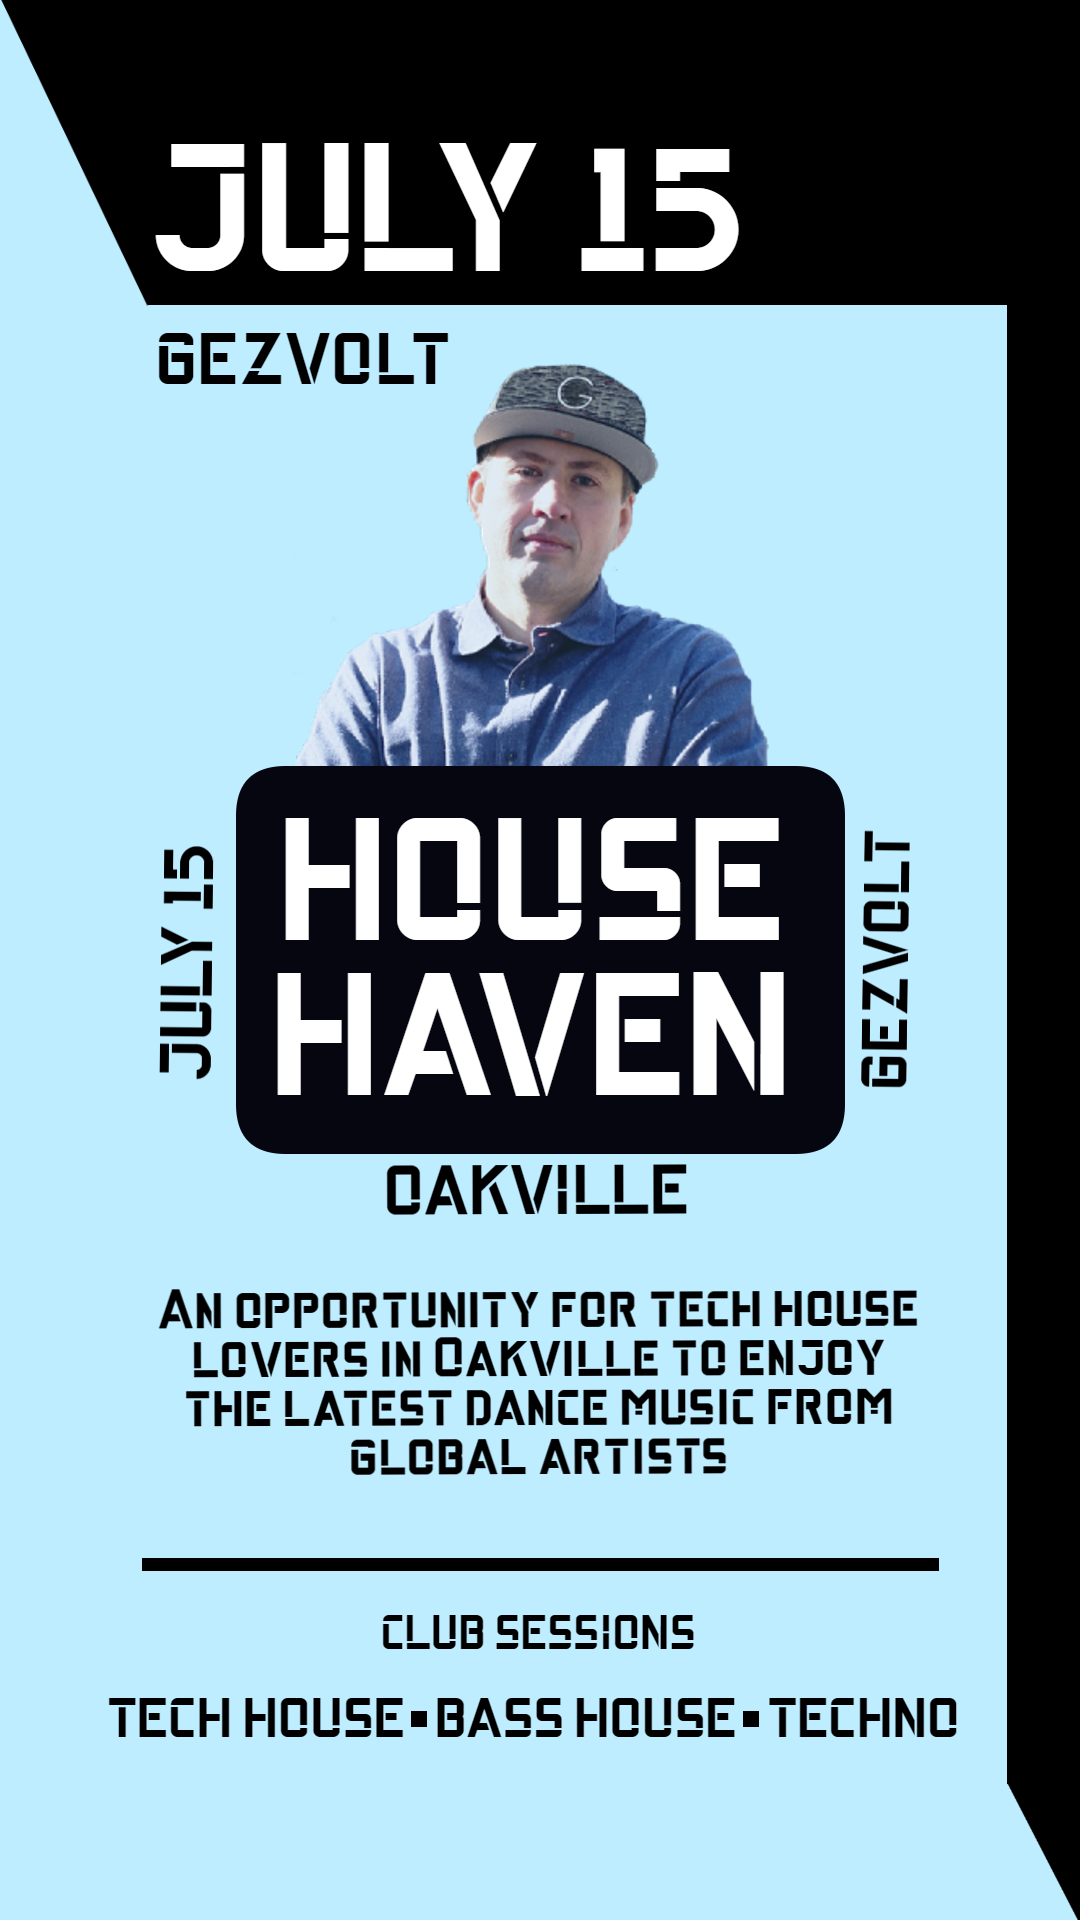 HOUSE HAVEN - フライヤー表